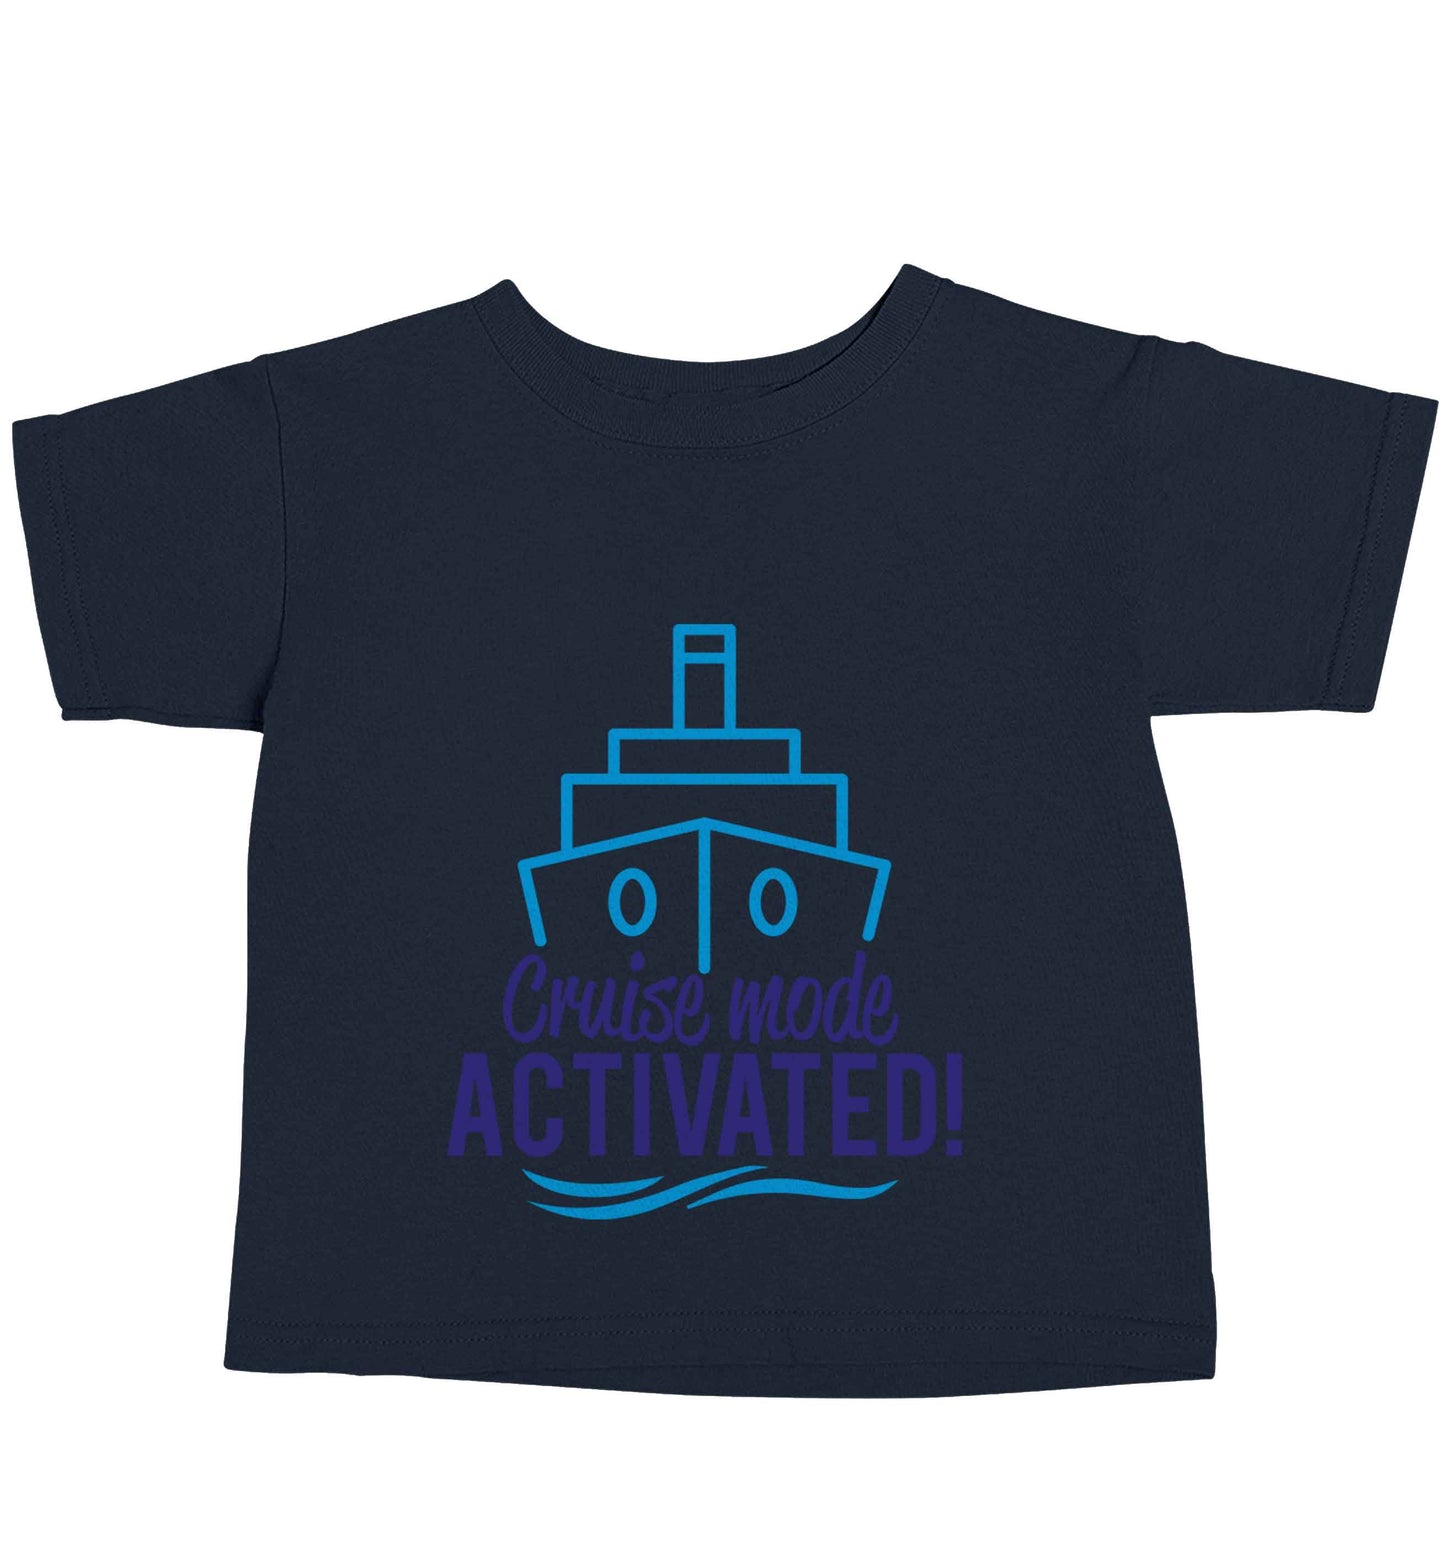 Cruise mode activated navy baby toddler Tshirt 2 Years